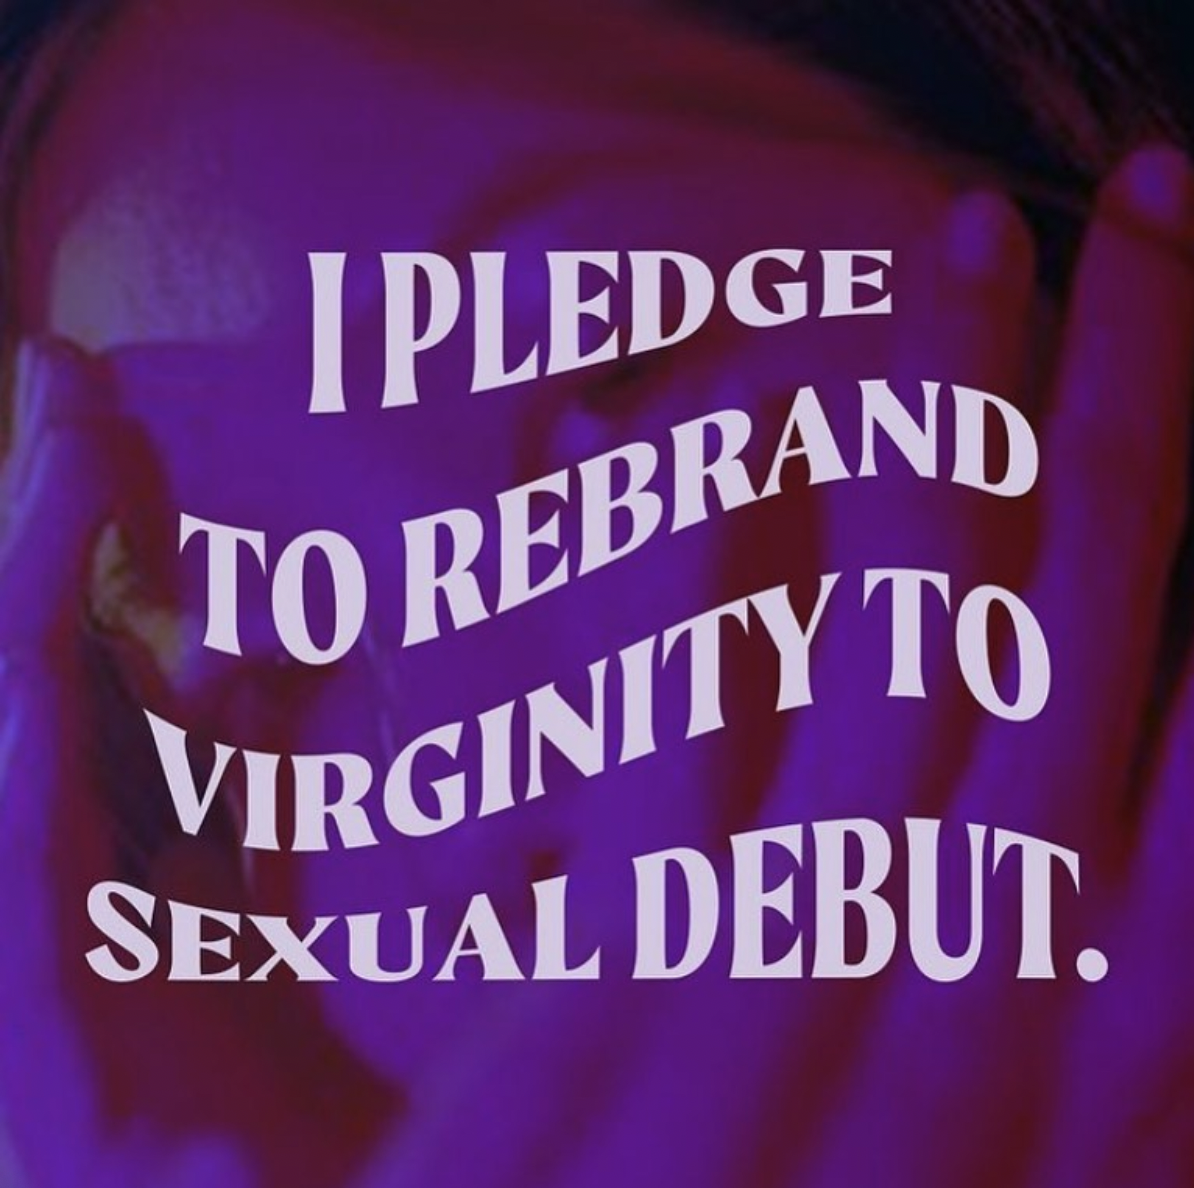 Sexual Debut - Popping the Virginity Myth with Nicolle Hodges